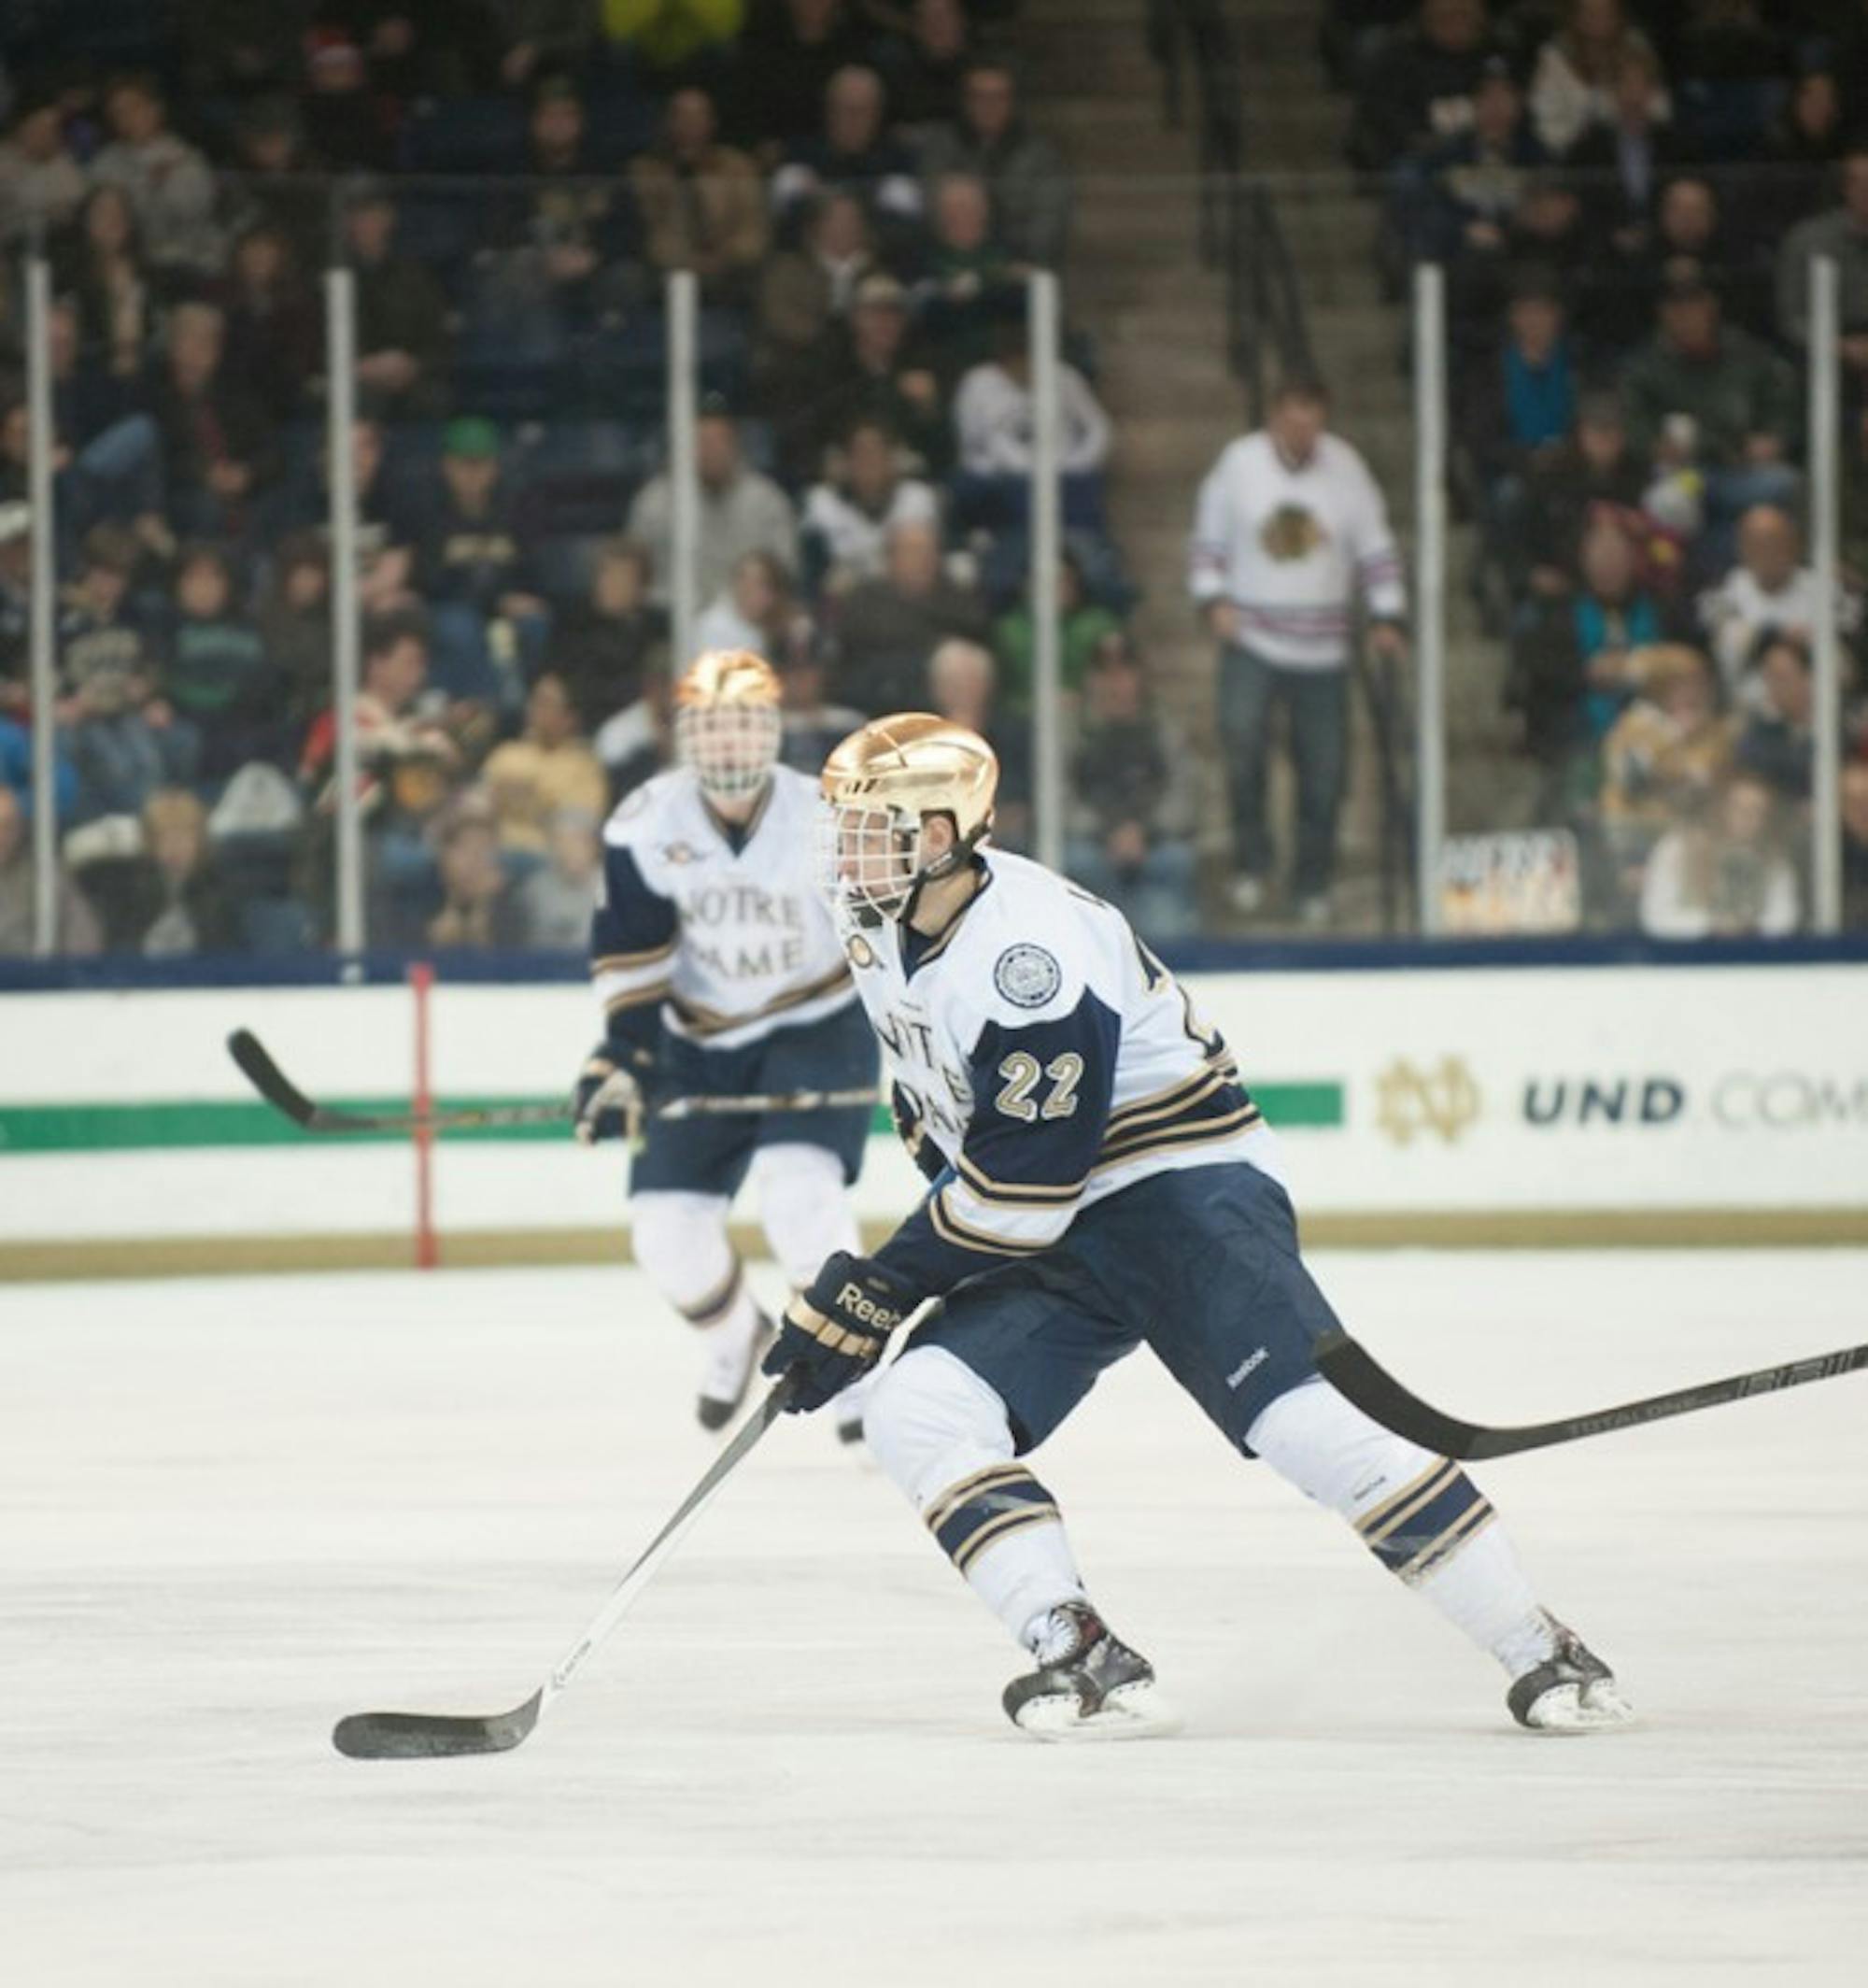 Sophomore left wing Mario Lucia looks to receive the puck during Notre Dame's 6-3 victory over Lake Superior State on Jan. 17.